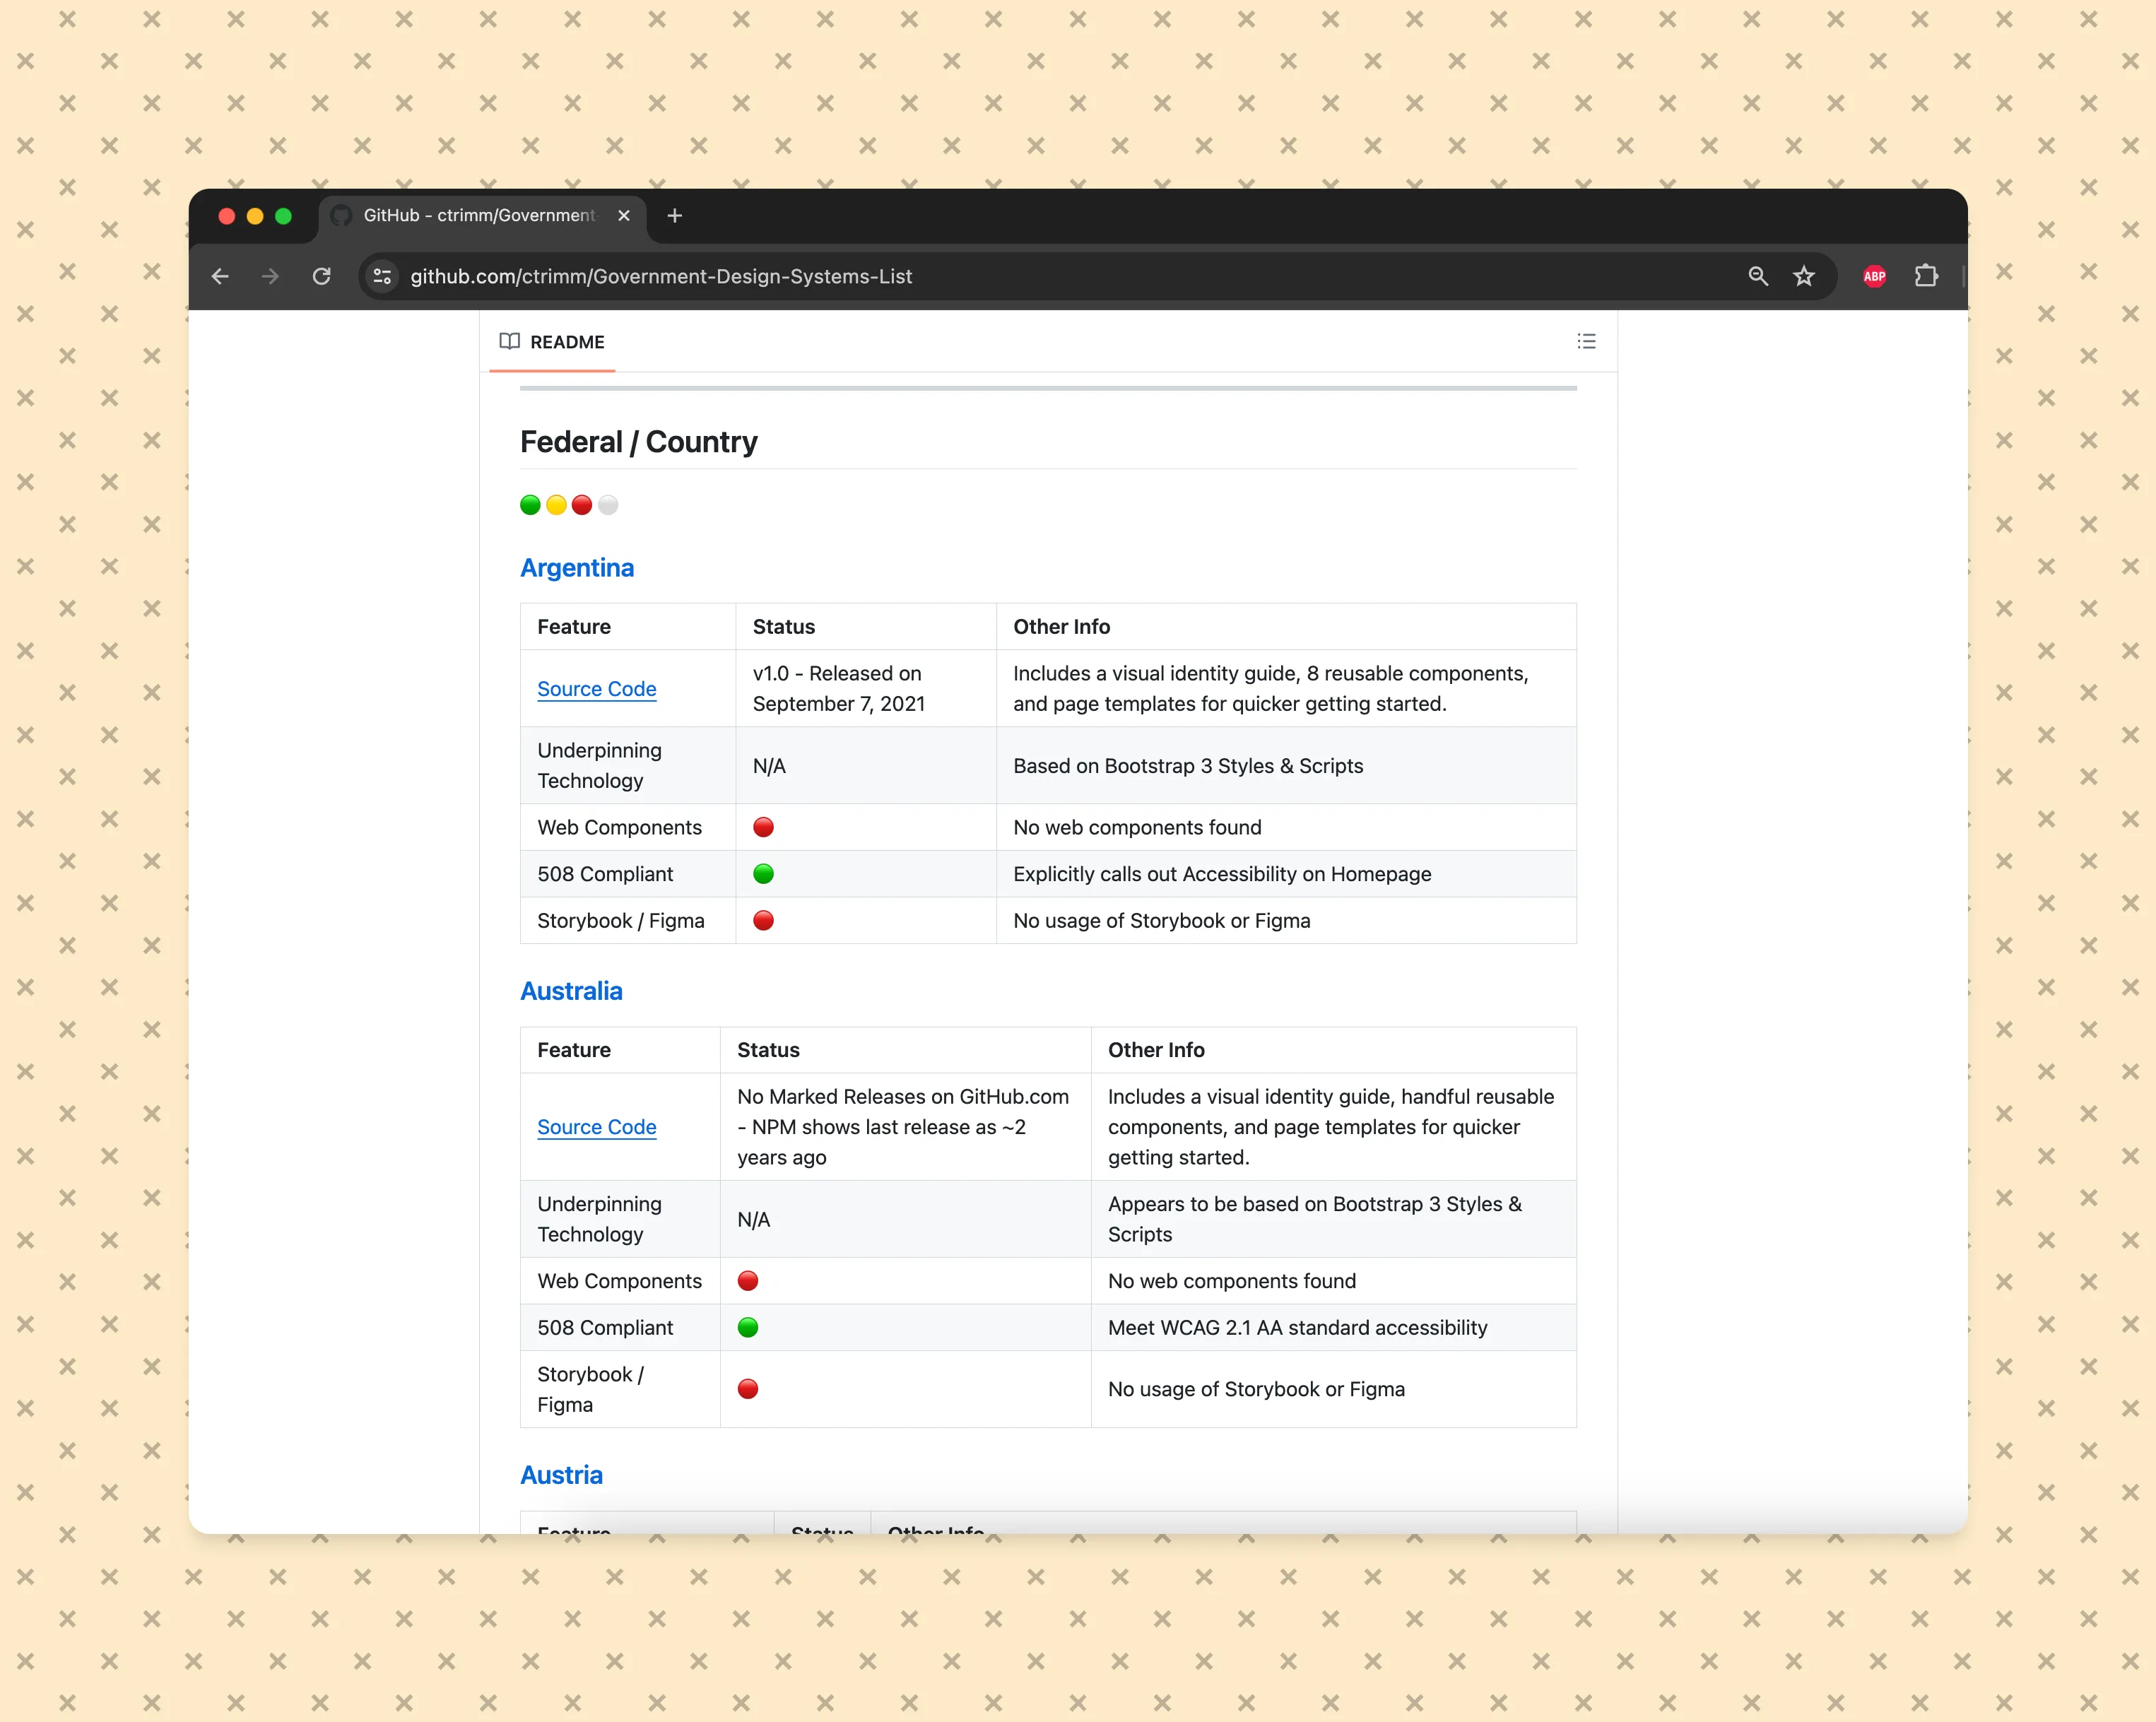 screenshot of a detail view of a couple government design system on GitHub.com